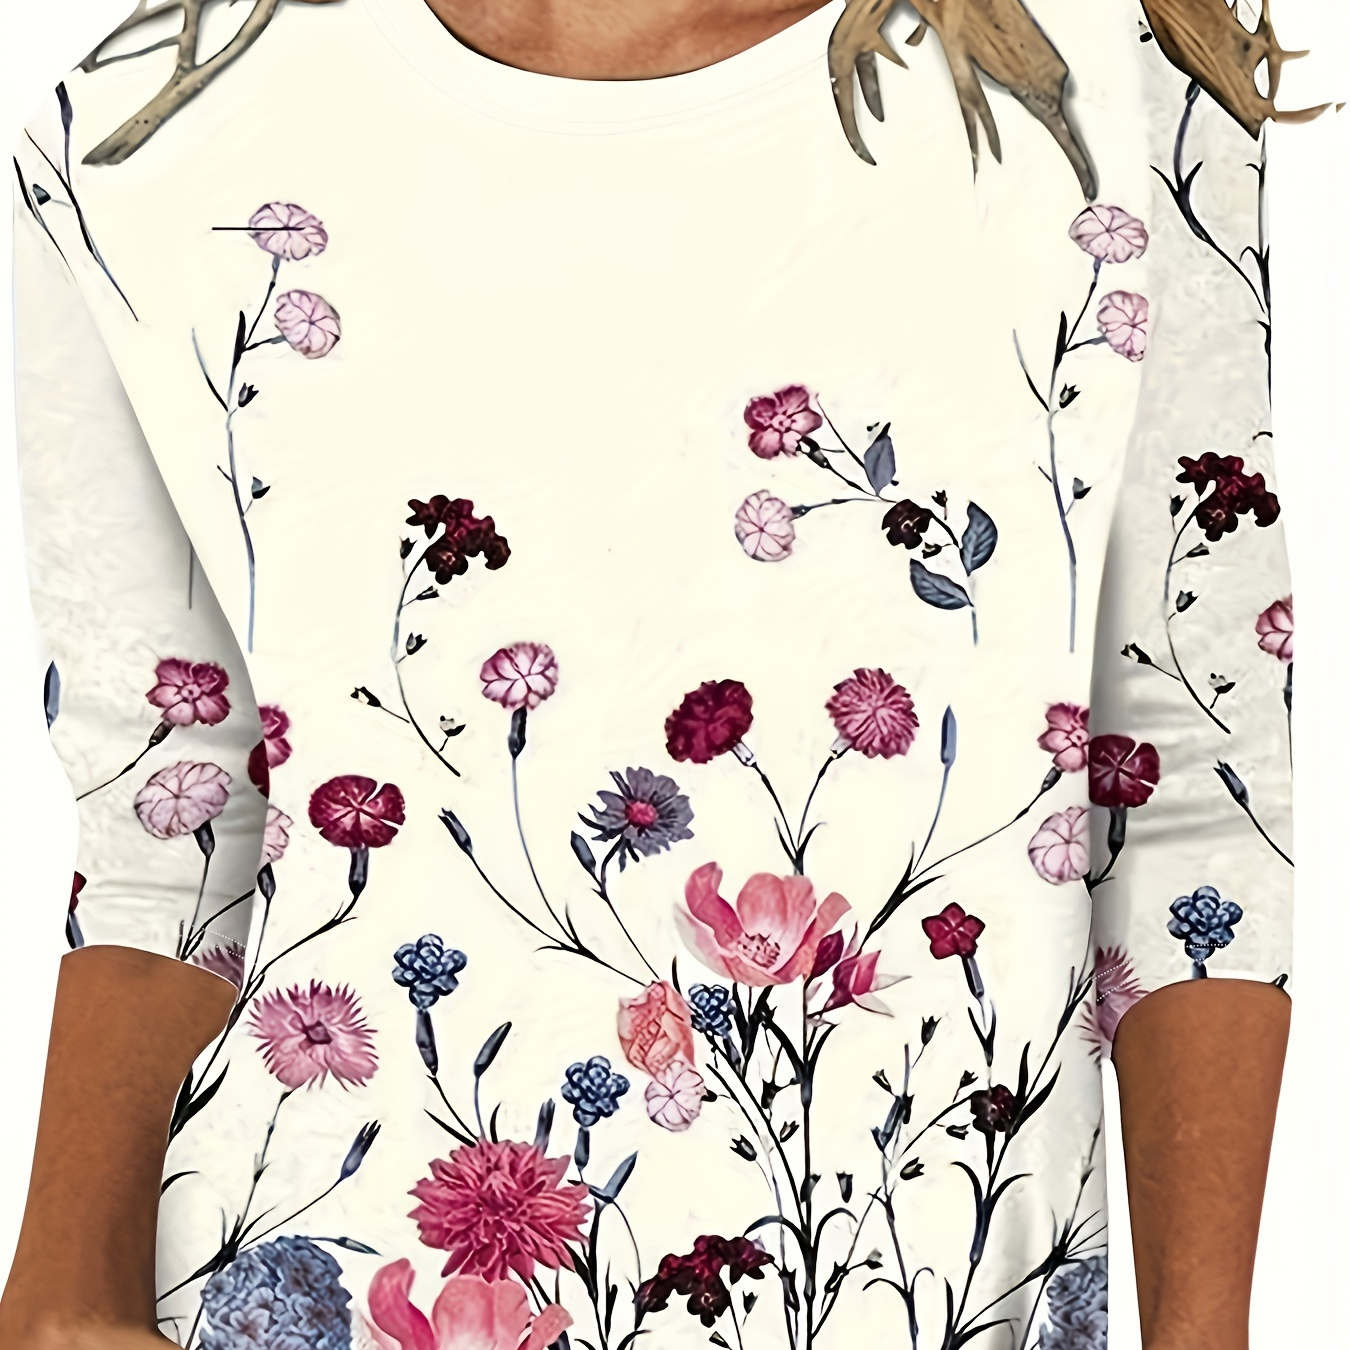 

Floral Print Crew Neck T-shirt, Casual Three-quarter Sleeve T-shirt For Spring & Fall, Women's Clothing